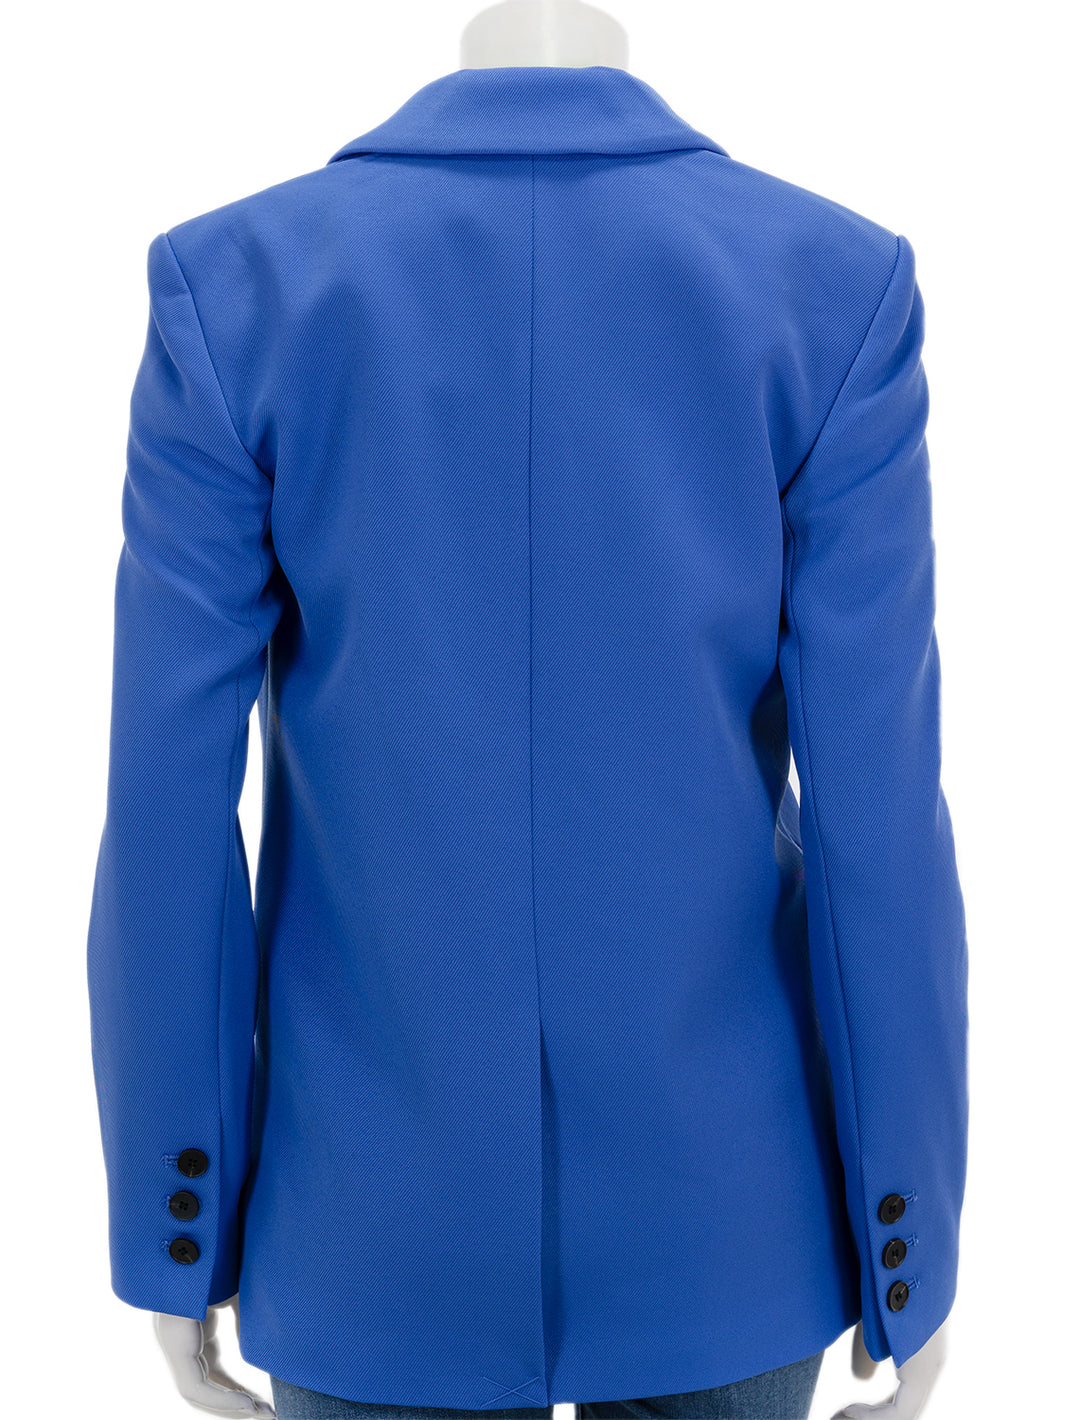 Back view of Saint Art's gia blazer in french blue.